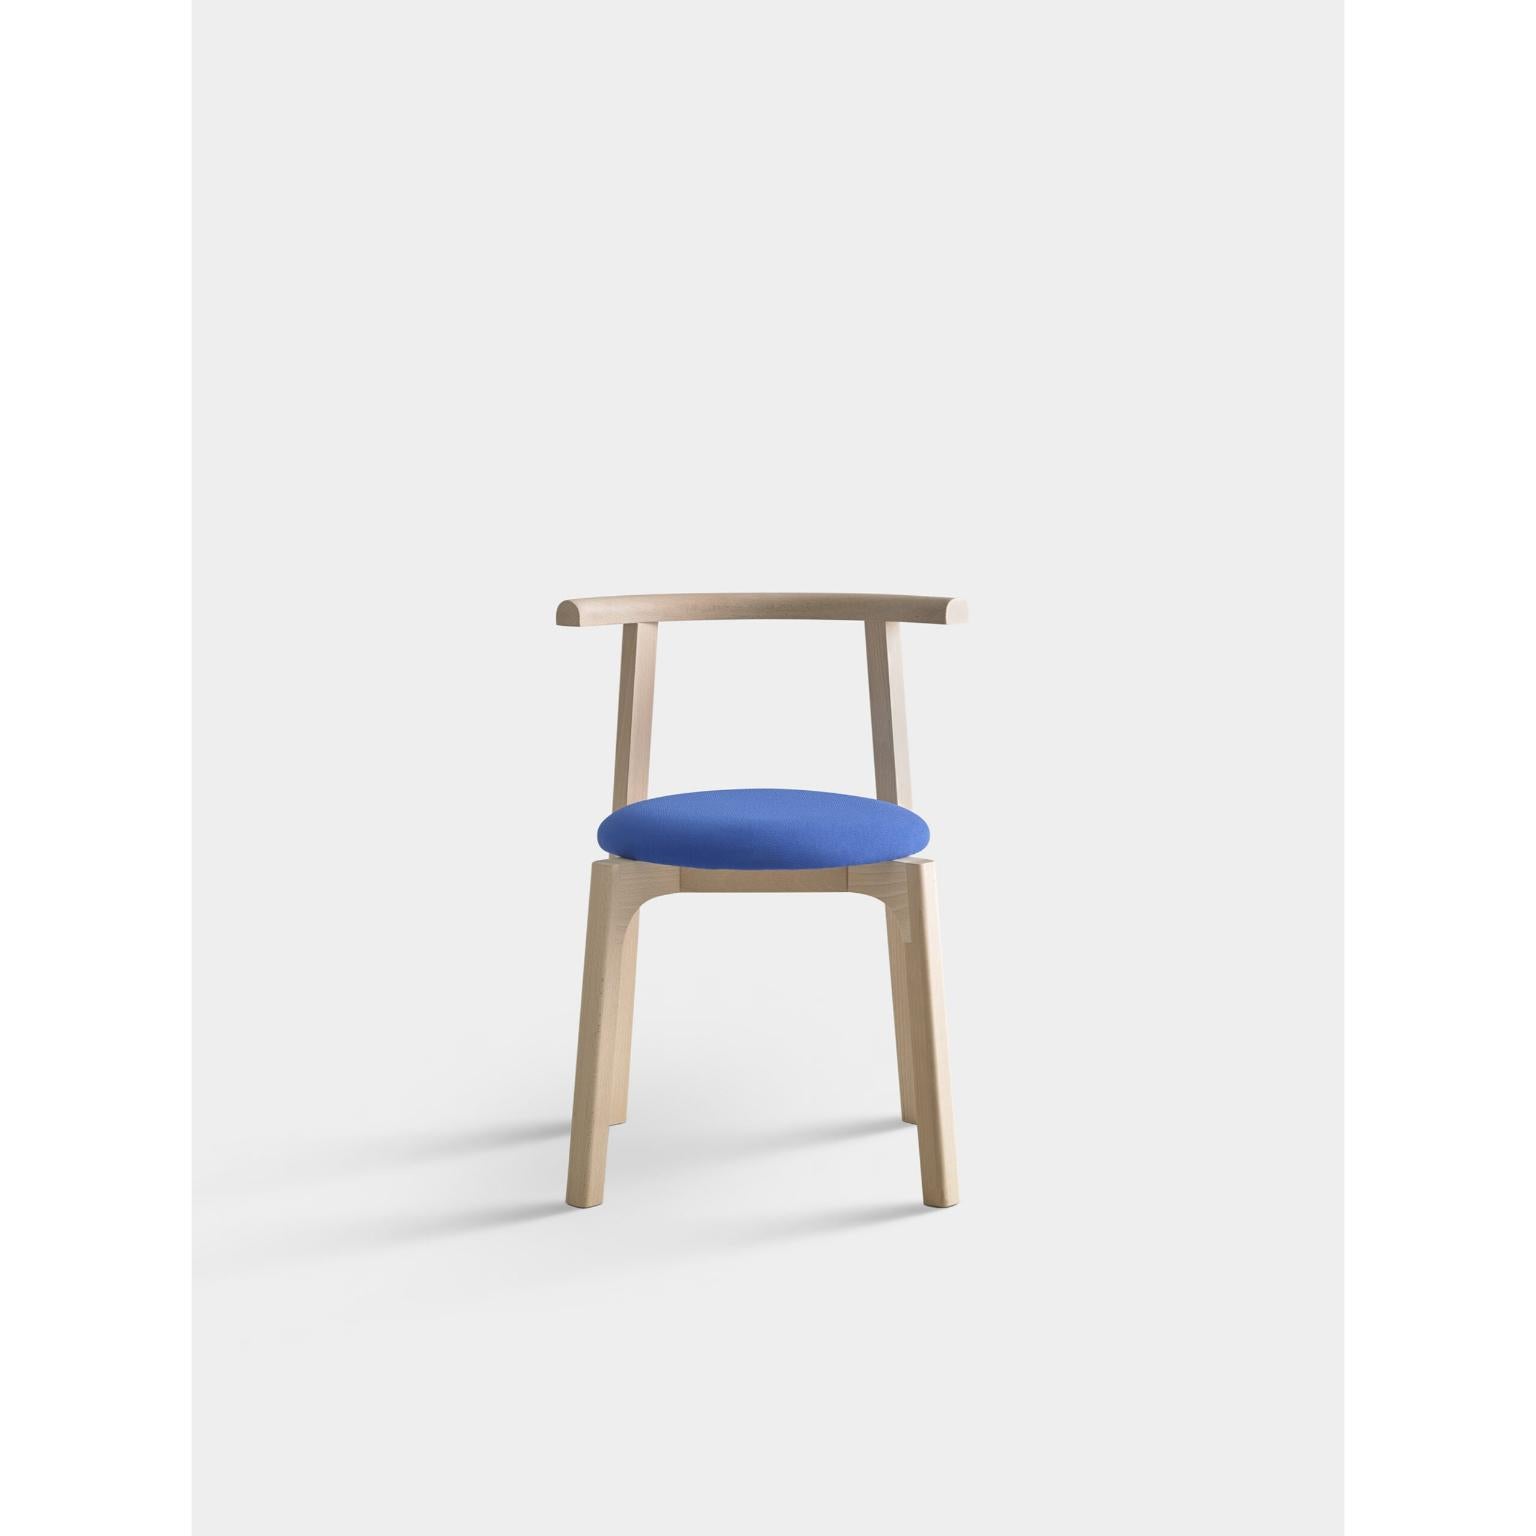 Carlo Beech Wood Chair by Pepe Albargues
Dimensions: W 55 x D 51 x H 73 cm 
Materials: Beech wood structure, foam CMHR.

Variations of materials are avaliable
Carlo is a chair in which the straight and curved lines show a perfect harmony to get a